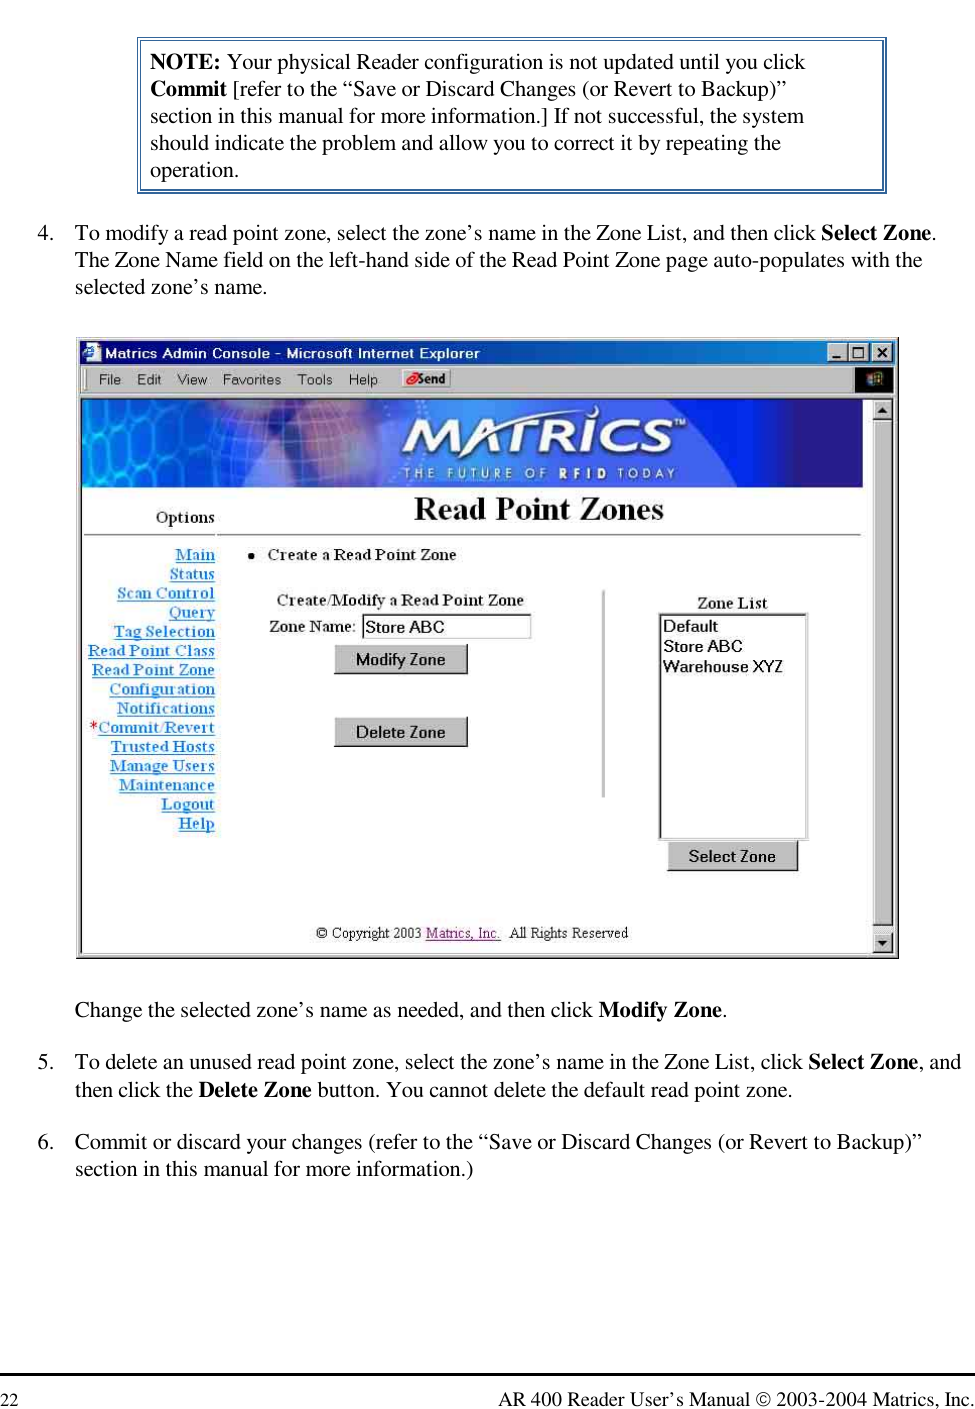  22  AR 400 Reader User’s Manual  2003-2004 Matrics, Inc. NOTE: Your physical Reader configuration is not updated until you click Commit [refer to the “Save or Discard Changes (or Revert to Backup)” section in this manual for more information.] If not successful, the system should indicate the problem and allow you to correct it by repeating the operation. 4.  To modify a read point zone, select the zone’s name in the Zone List, and then click Select Zone. The Zone Name field on the left-hand side of the Read Point Zone page auto-populates with the selected zone’s name.  Change the selected zone’s name as needed, and then click Modify Zone. 5.  To delete an unused read point zone, select the zone’s name in the Zone List, click Select Zone, and then click the Delete Zone button. You cannot delete the default read point zone. 6.  Commit or discard your changes (refer to the “Save or Discard Changes (or Revert to Backup)” section in this manual for more information.) 